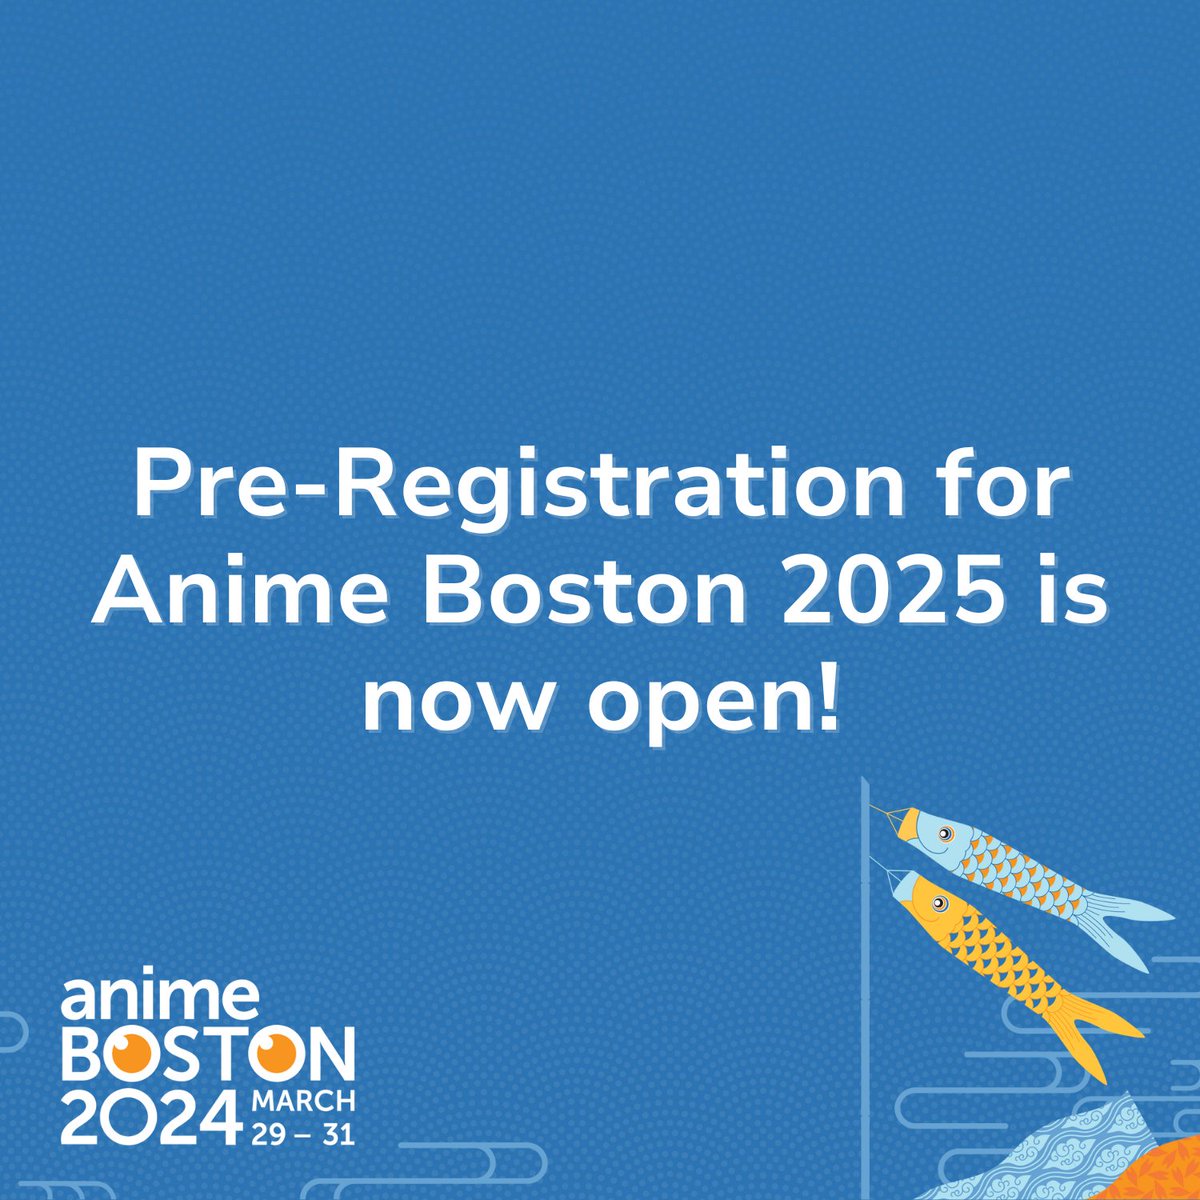 Had fun at Anime Boston 2024? Then Pre-register for next year now!!! Pre-Registration be open until April 14th, 2024 at animeboston.com/2025